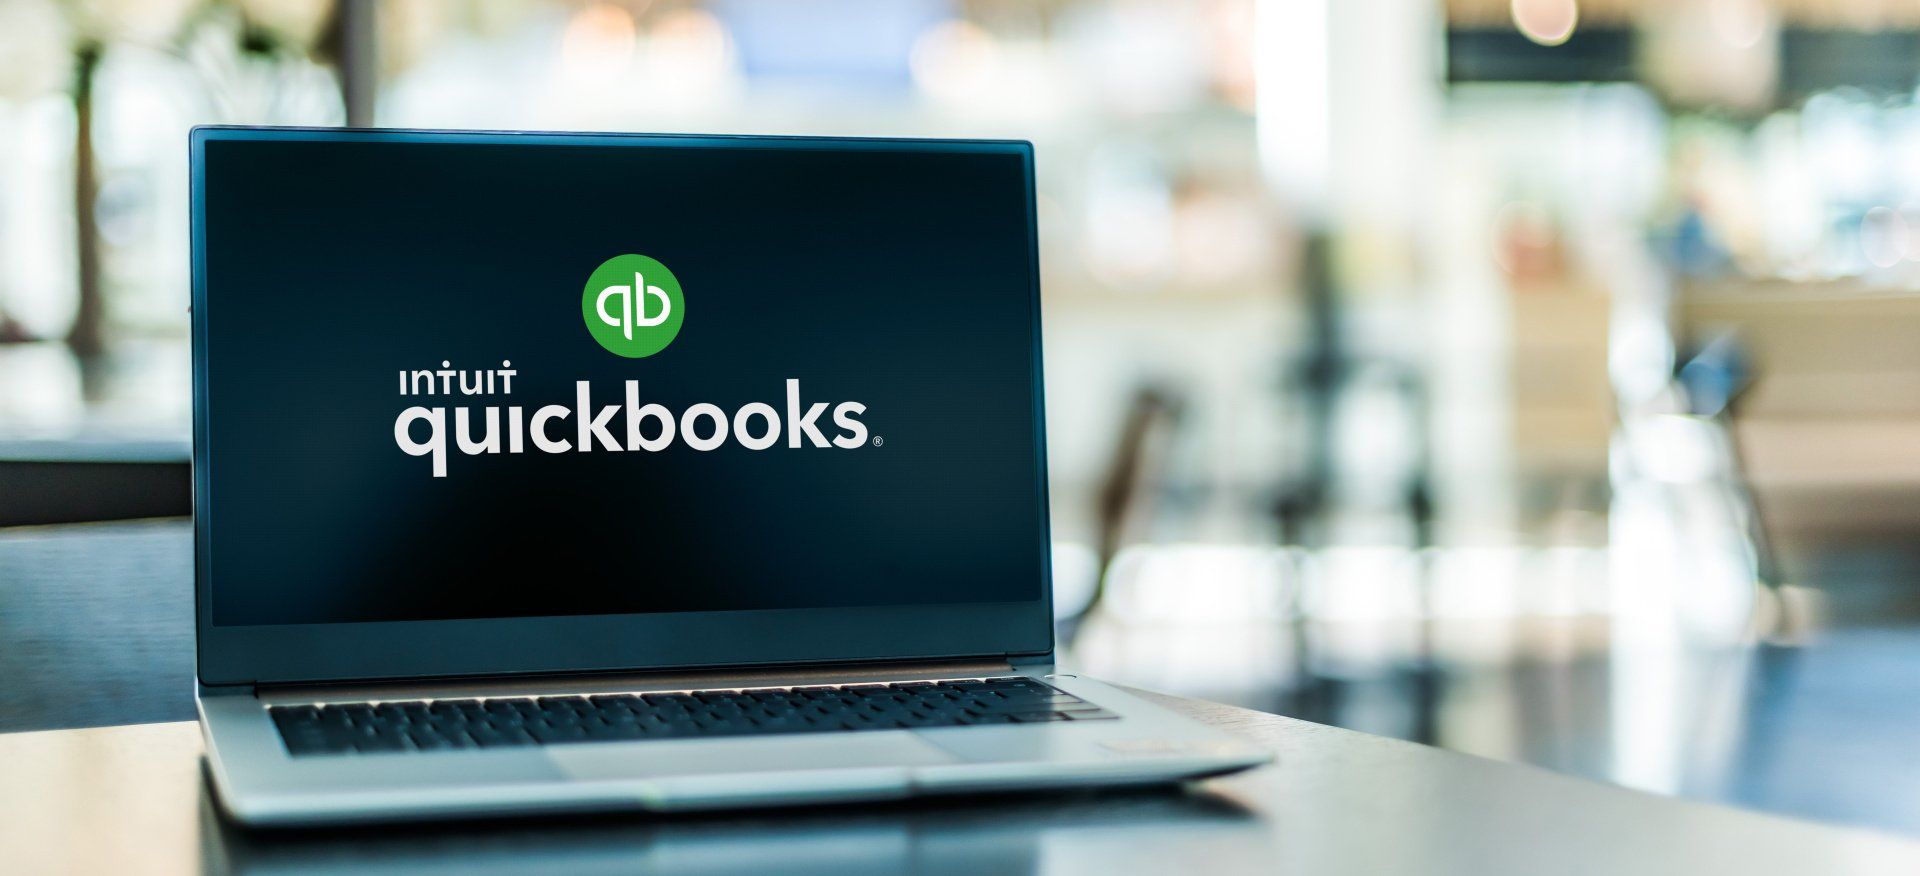 A laptop computer is sitting on a table with a quickbooks logo on the screen.